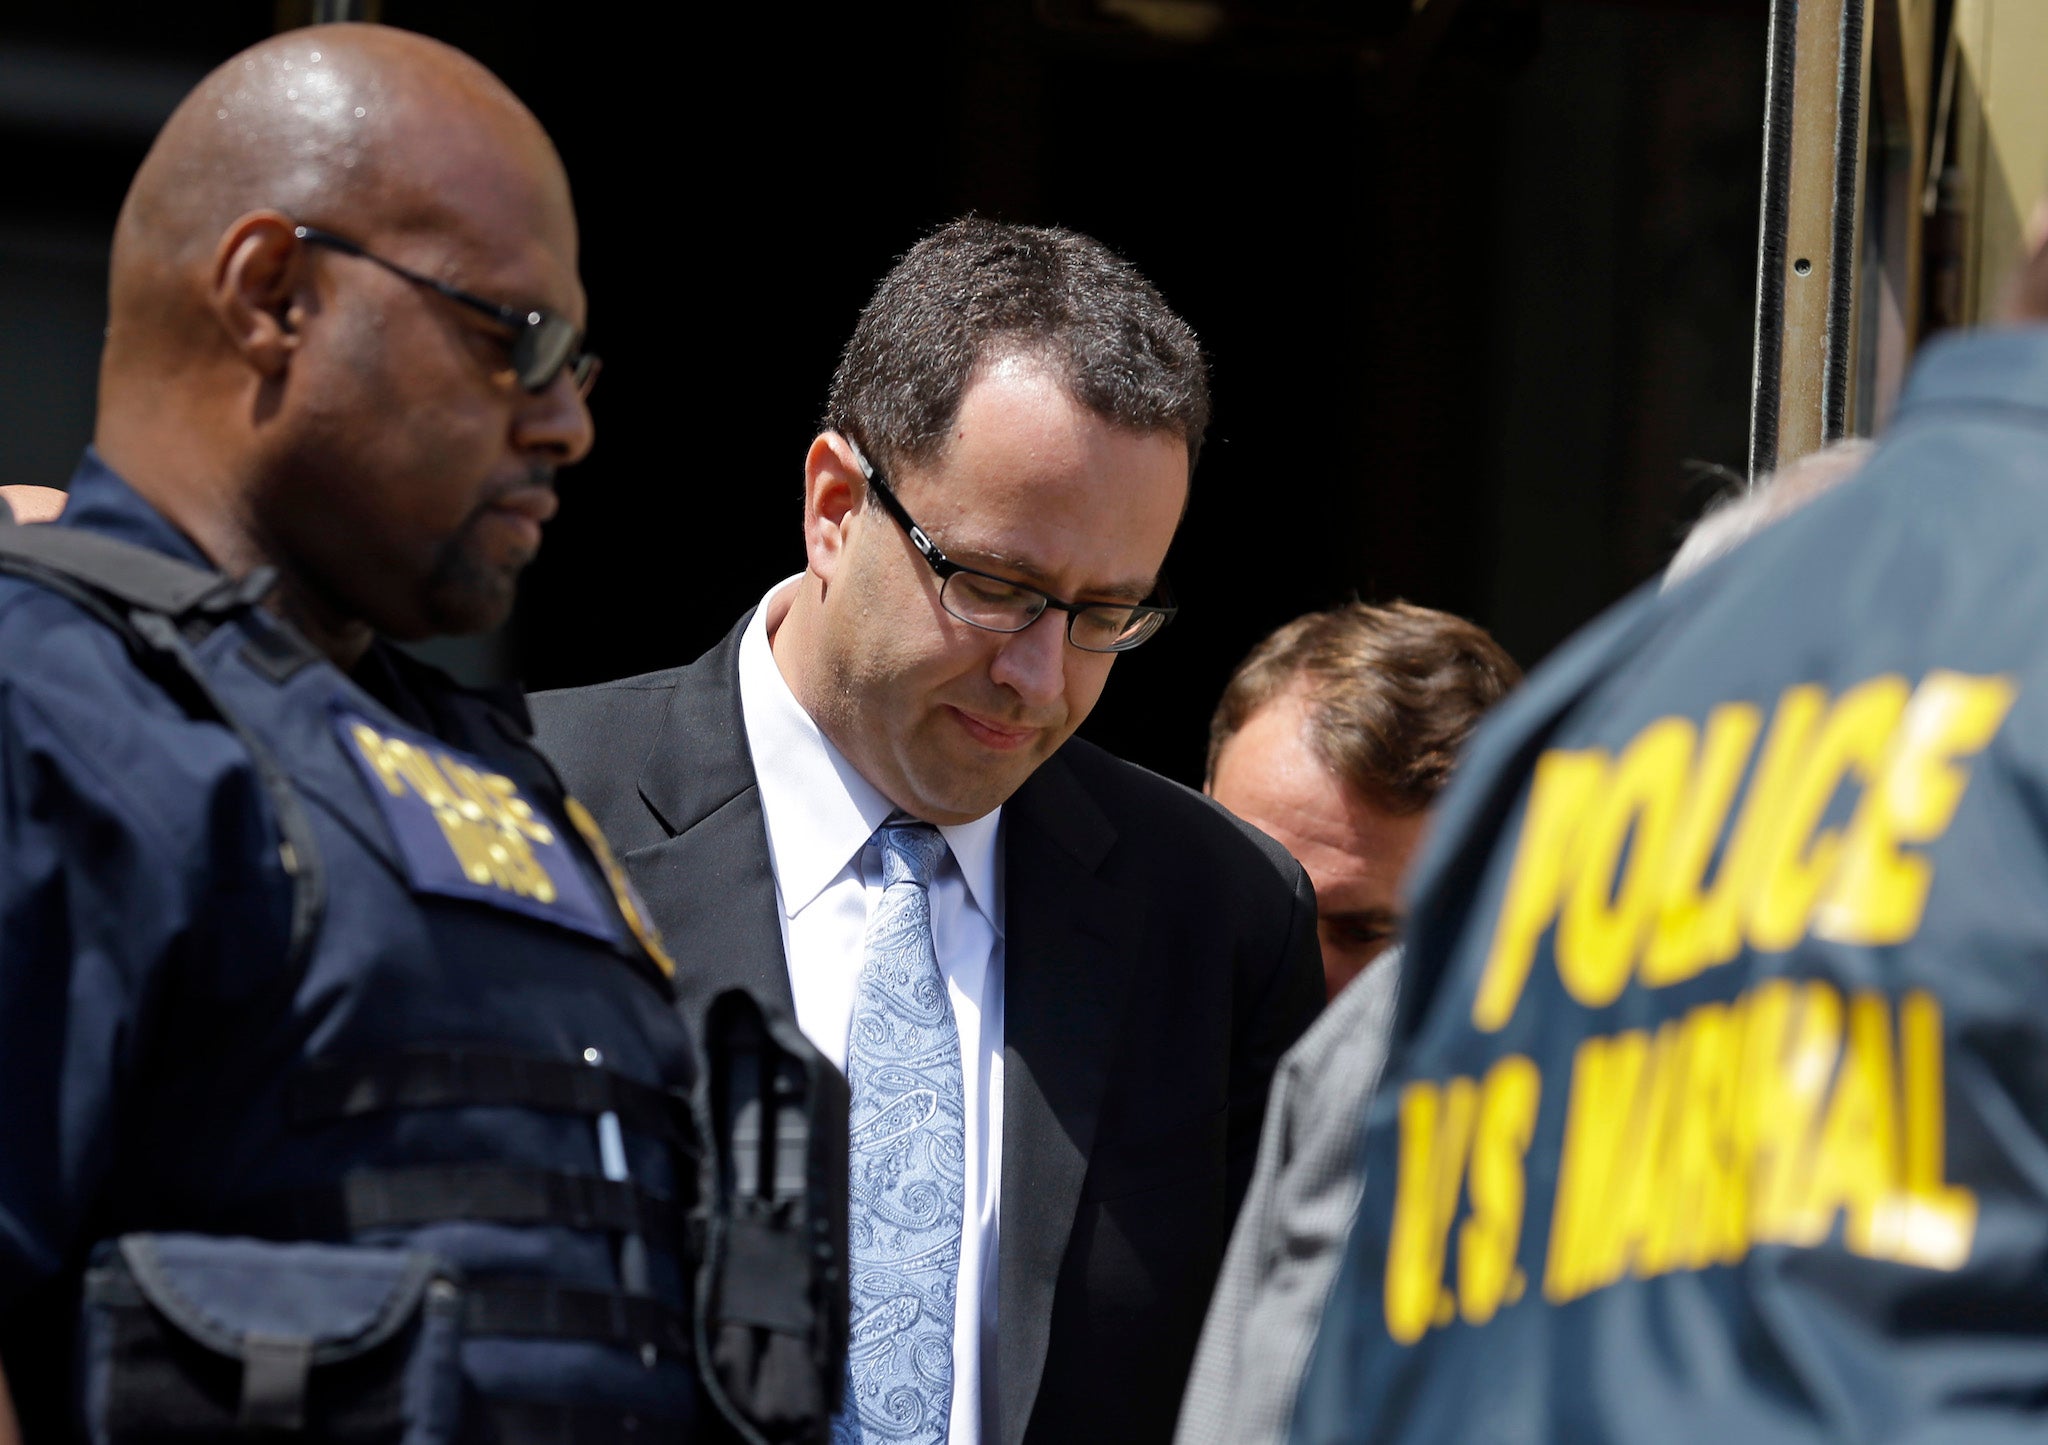 Jared Fogle leaves the Federal Courthouse in Indianapolis.